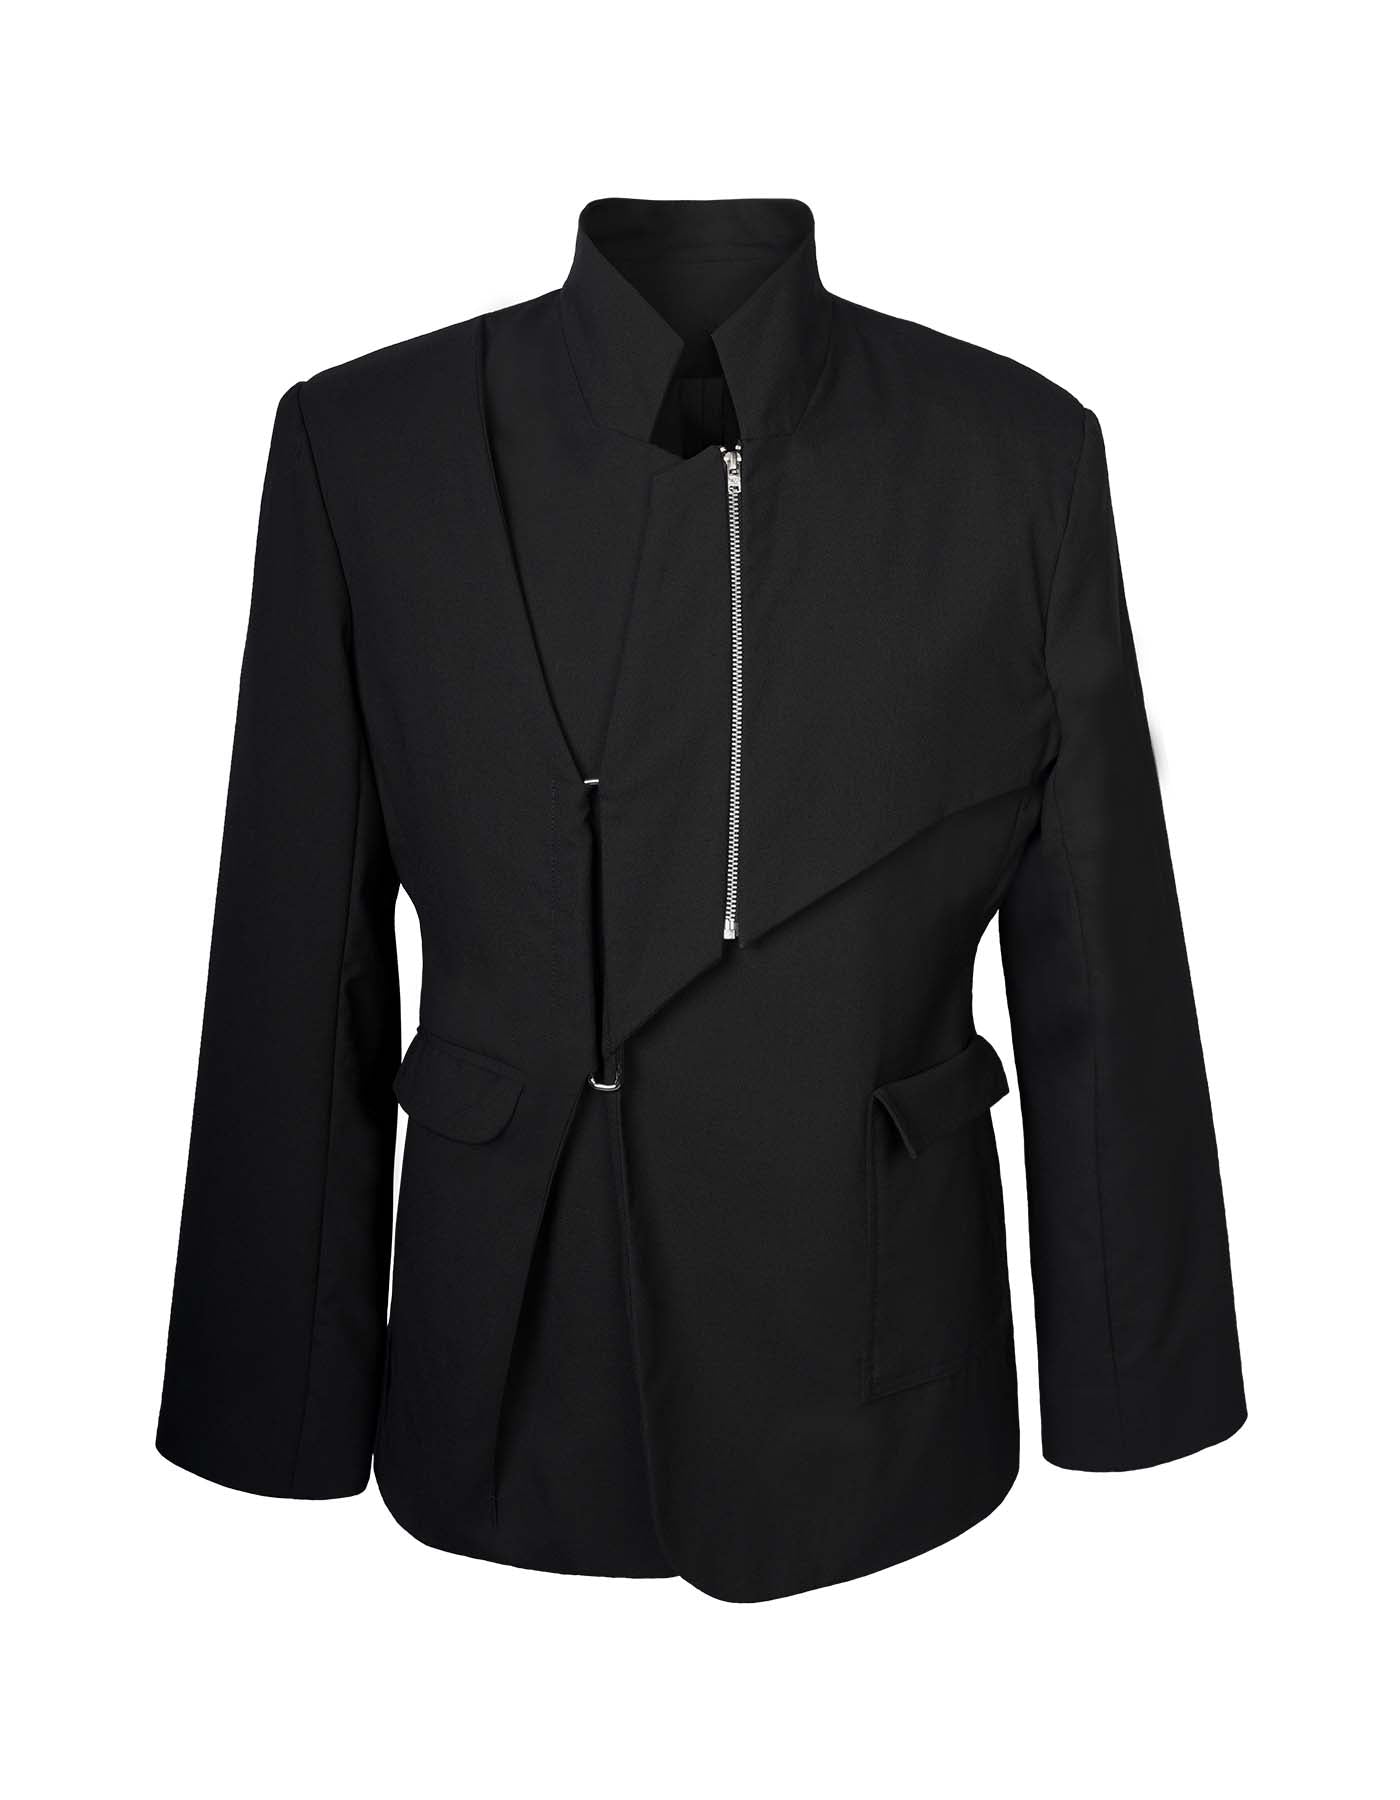 Deconstructed Rider Style Jacket With Metal Ring